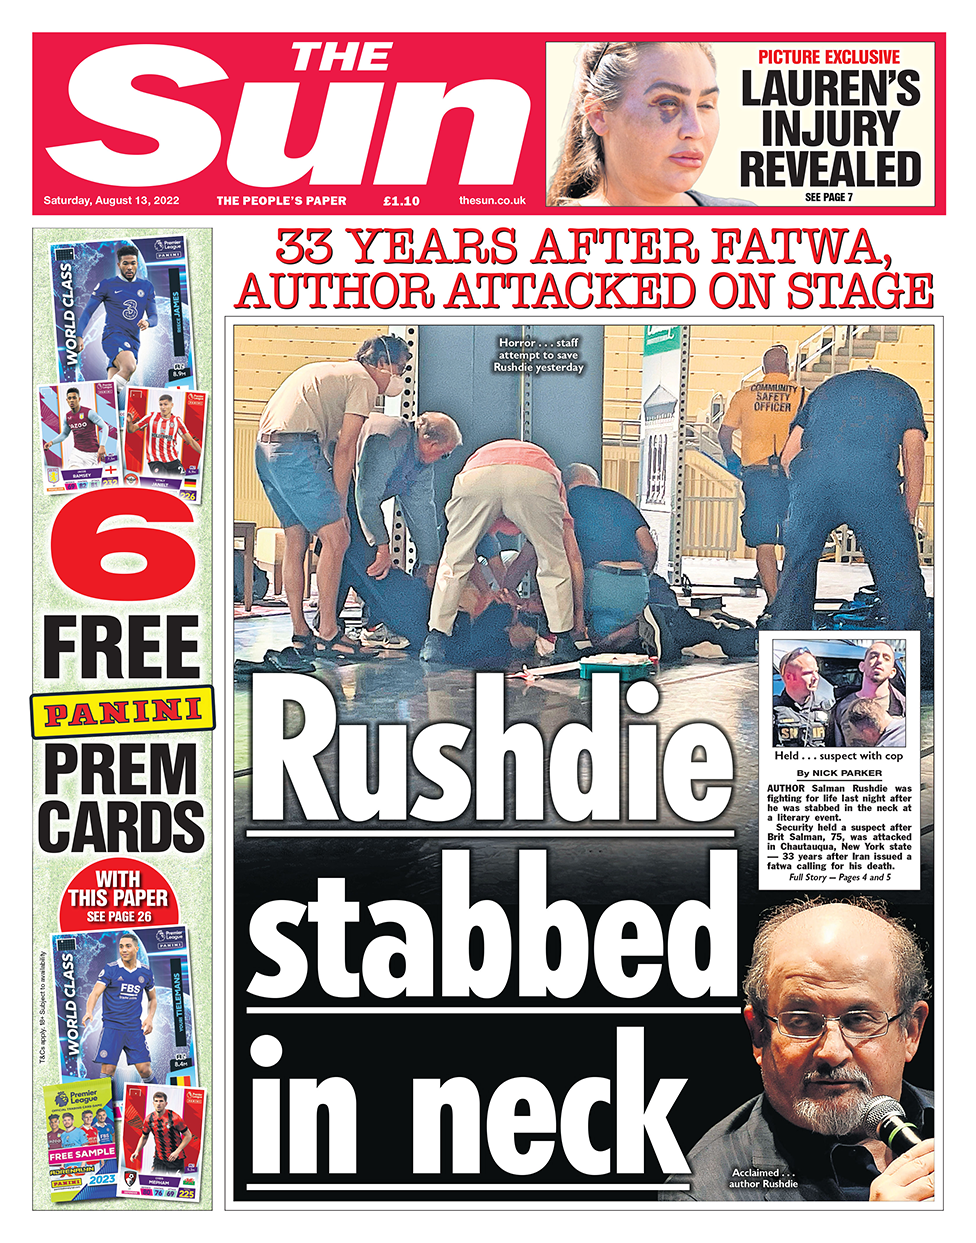 The headline in the Sun reads: "Rushdie stabbed in neck".